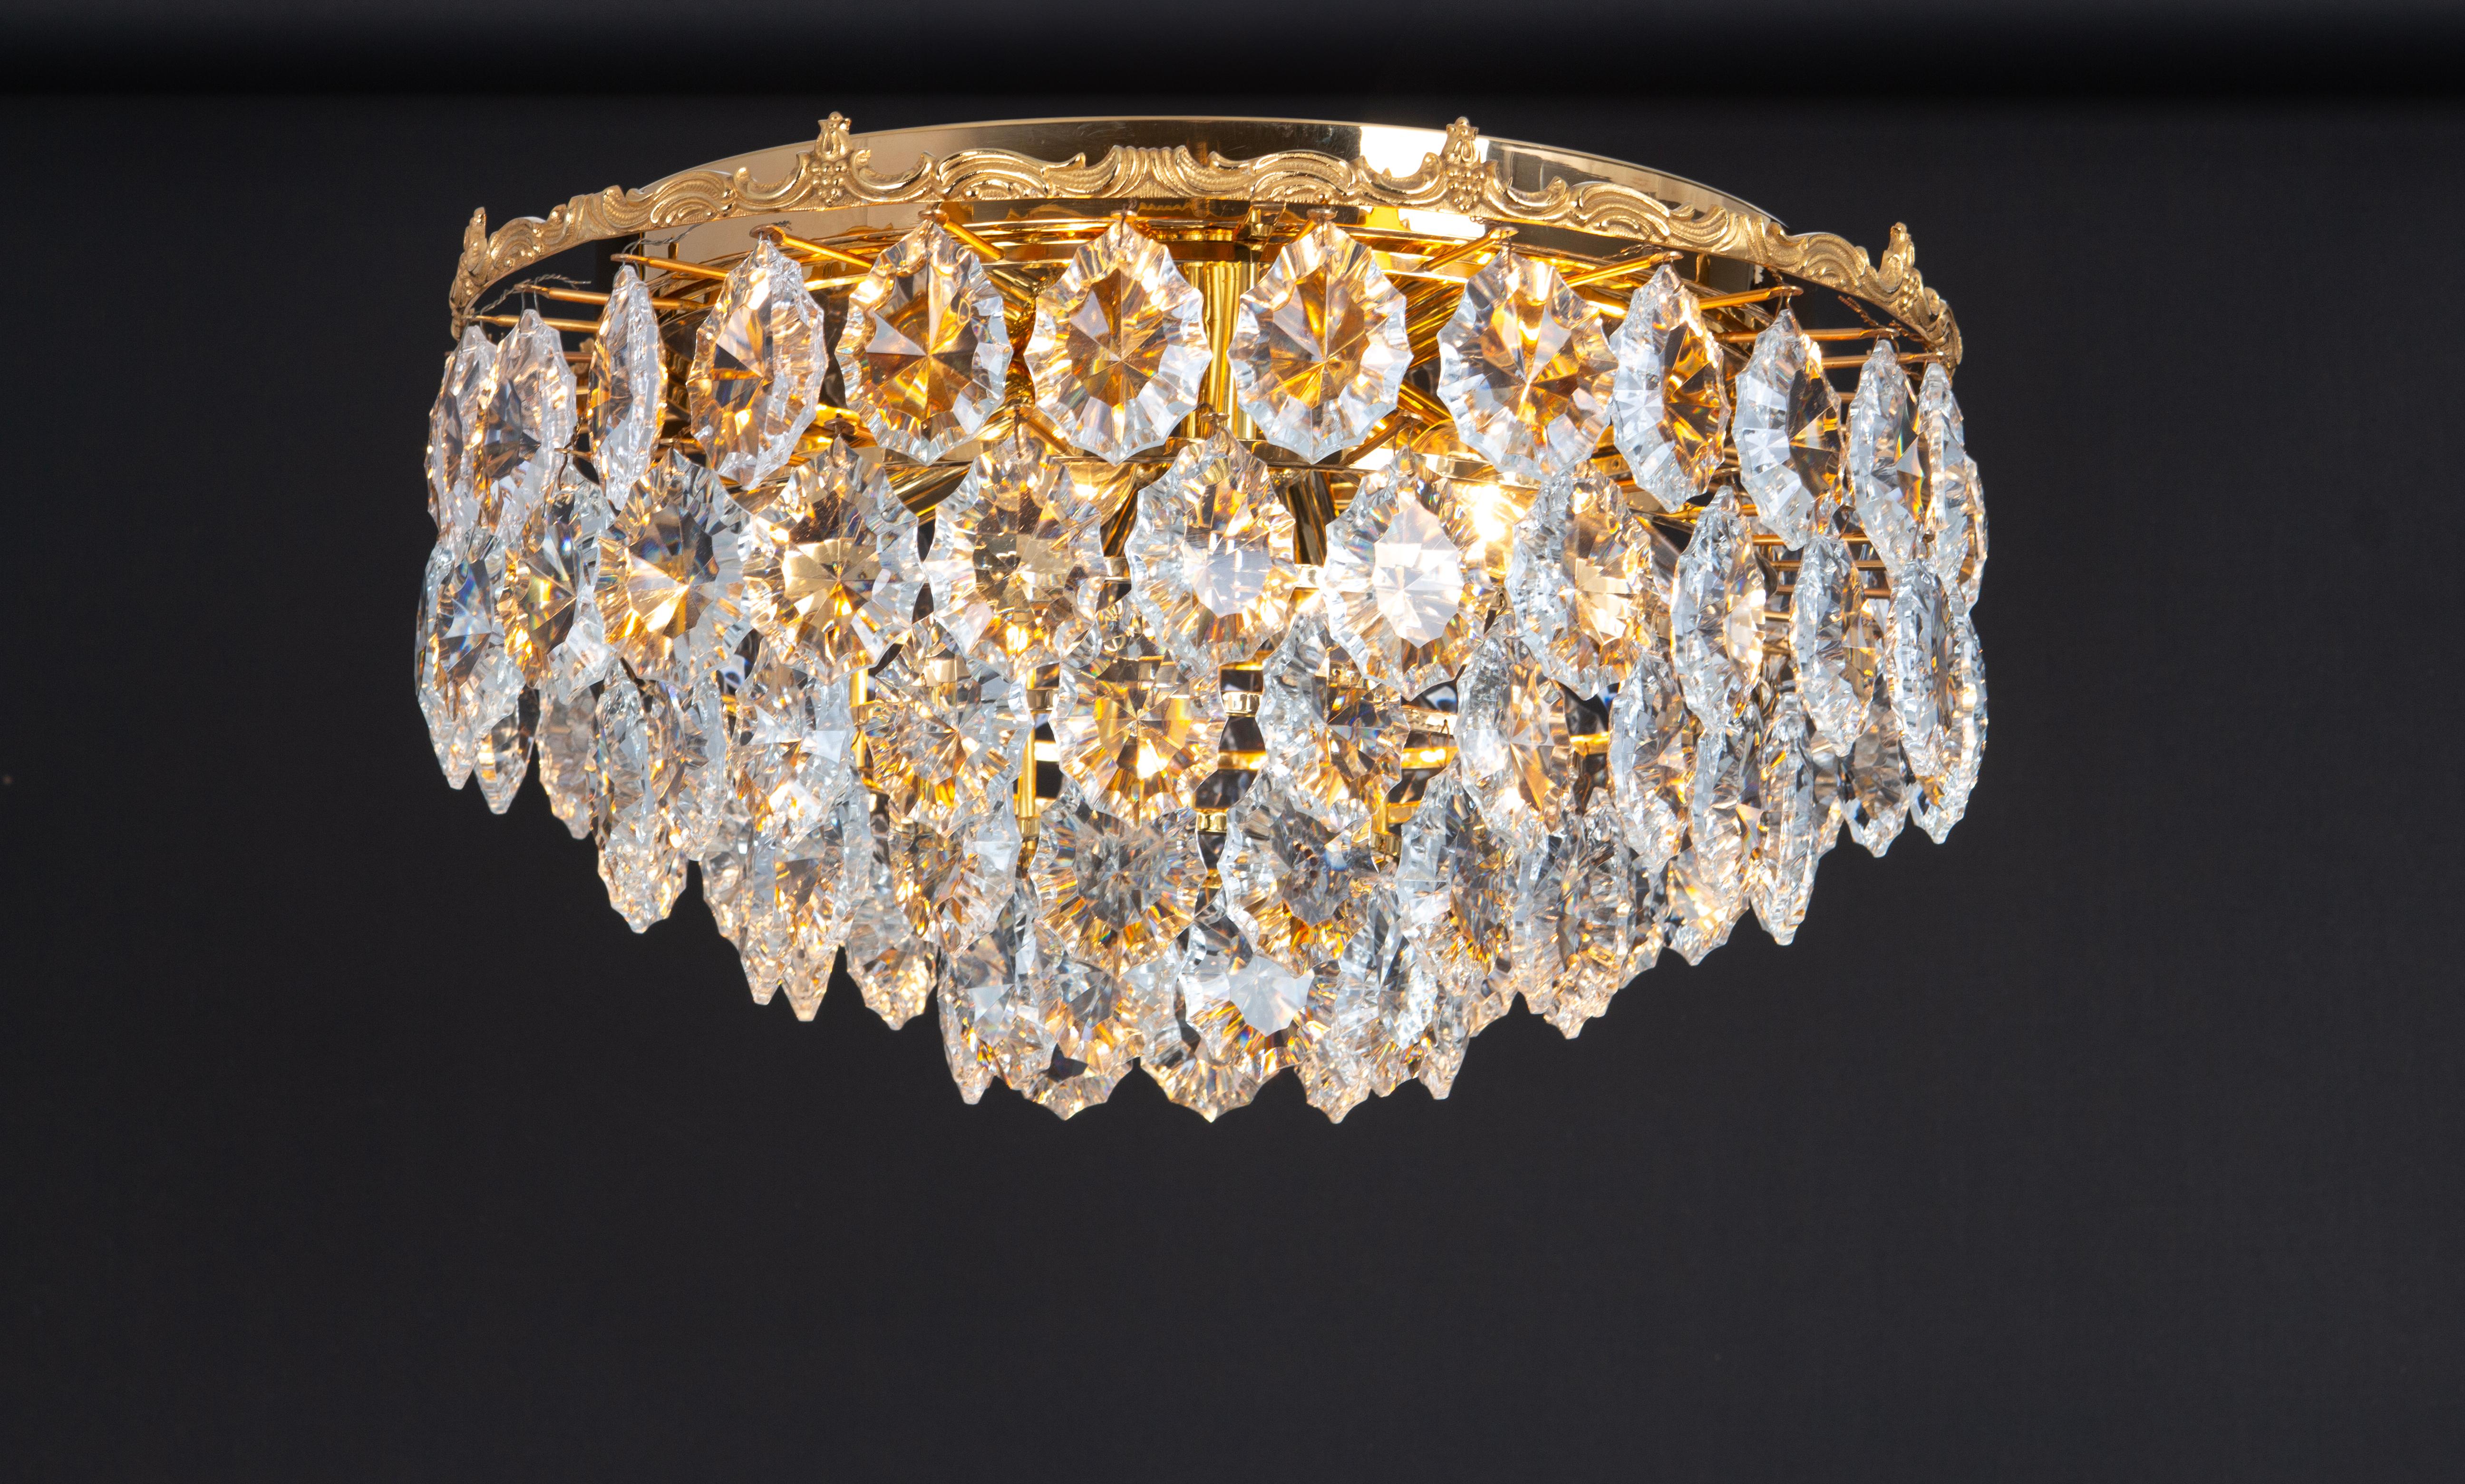 Bakalowits Flush mount light, Brass and Crystal Glass, Austria, 1960s For Sale 2